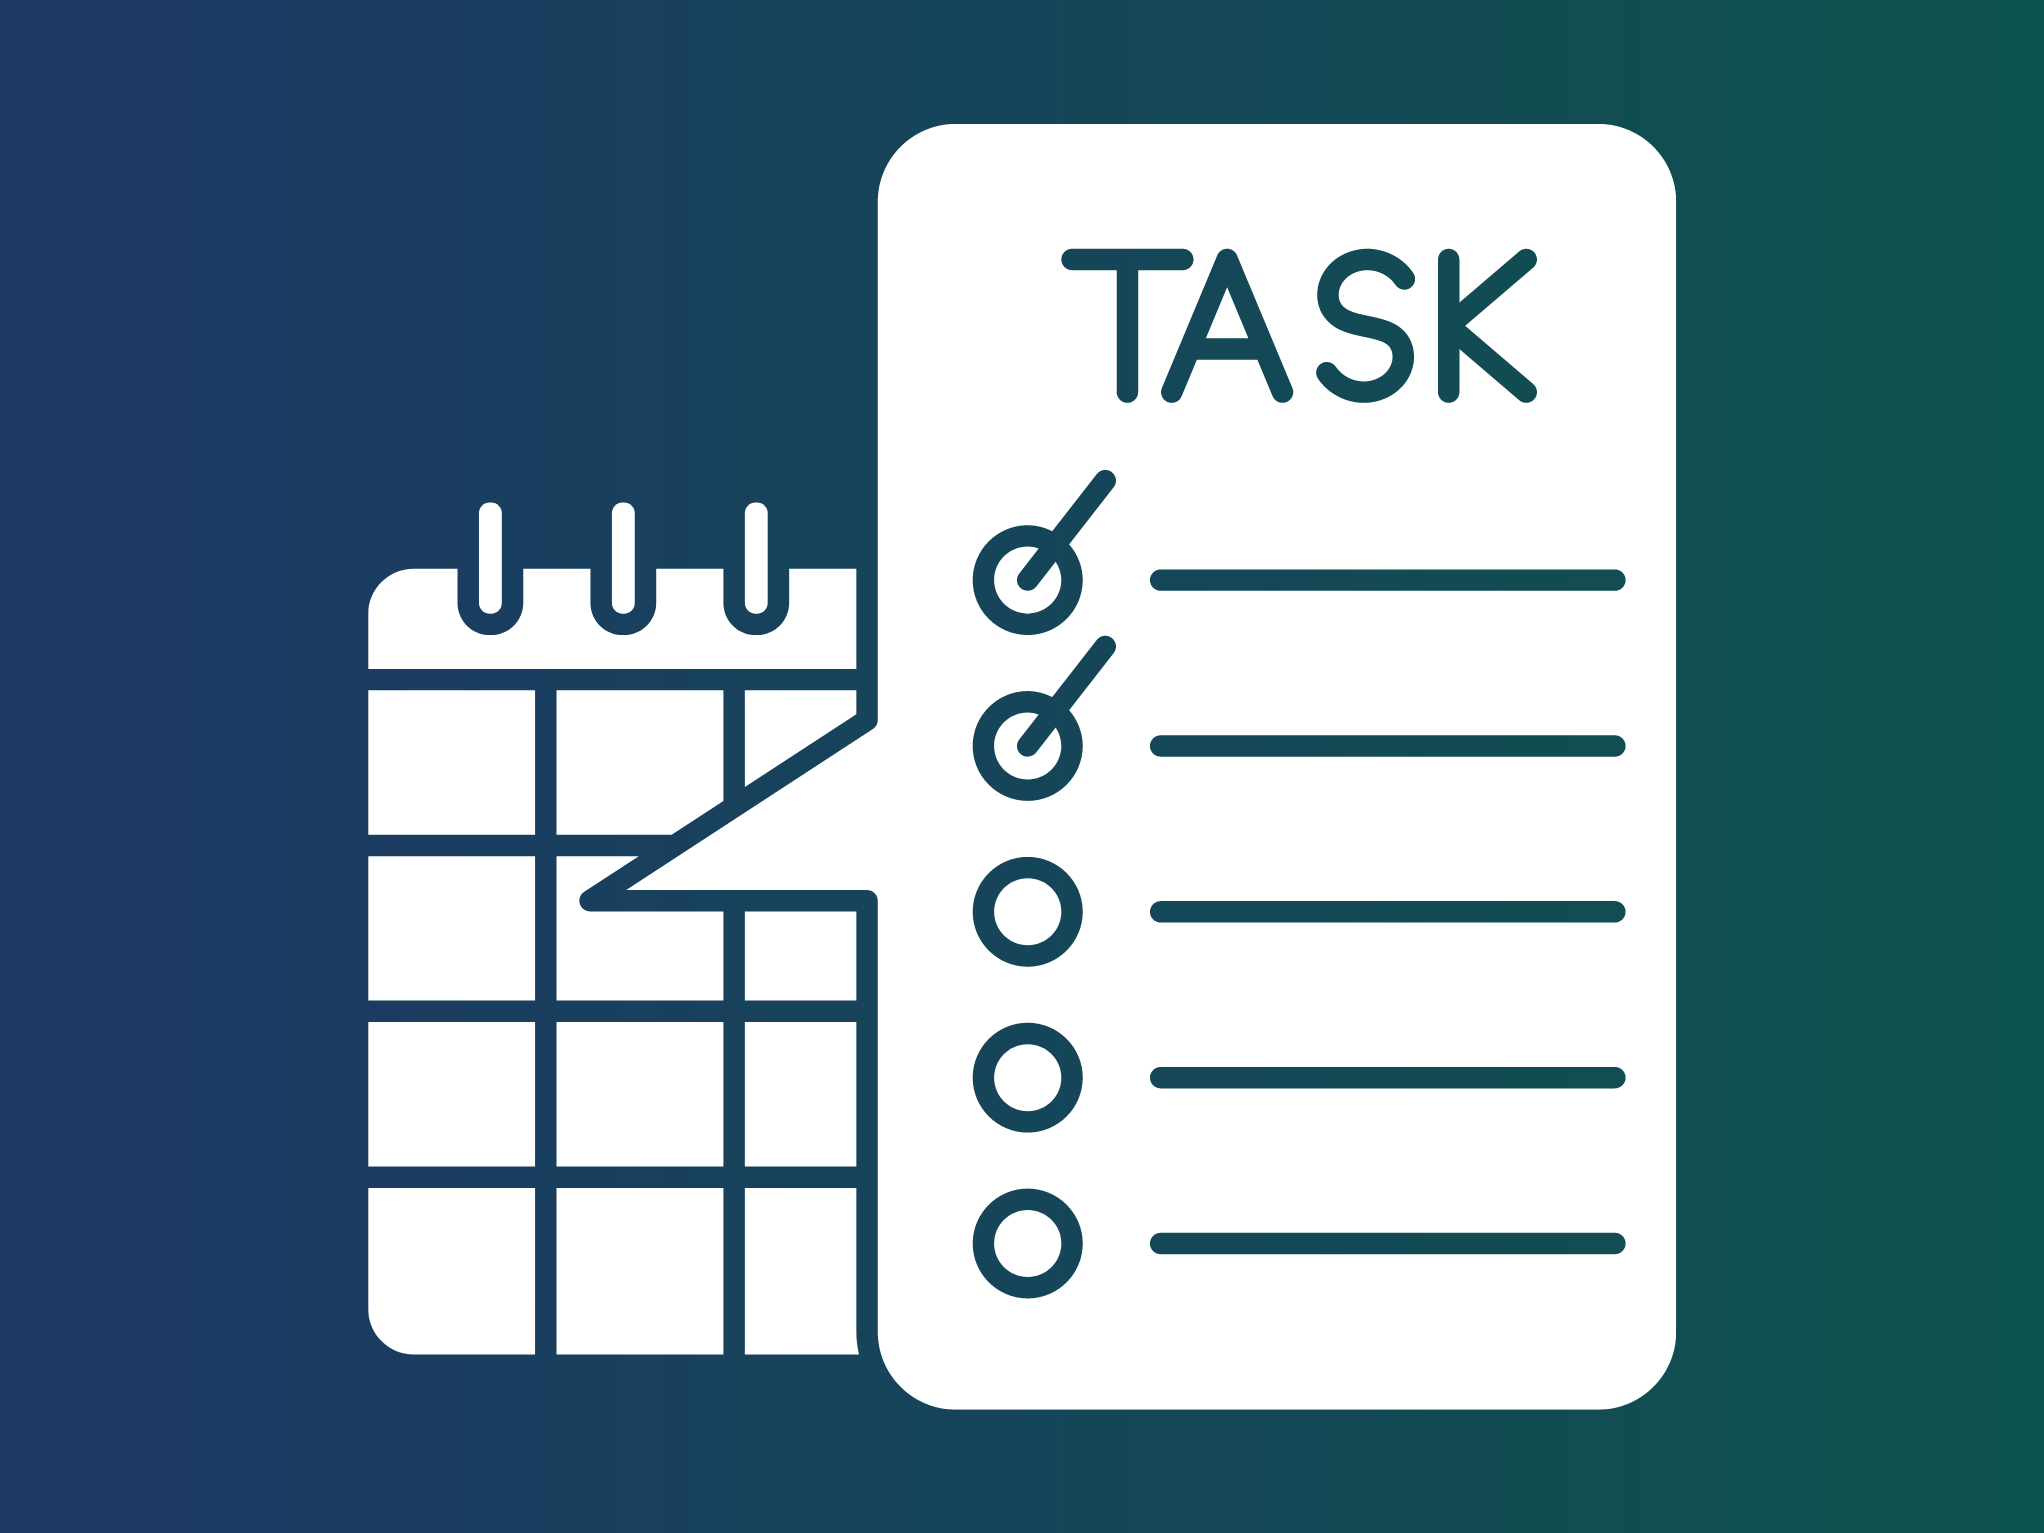 calendar icon with day enlarged to show a daily task list